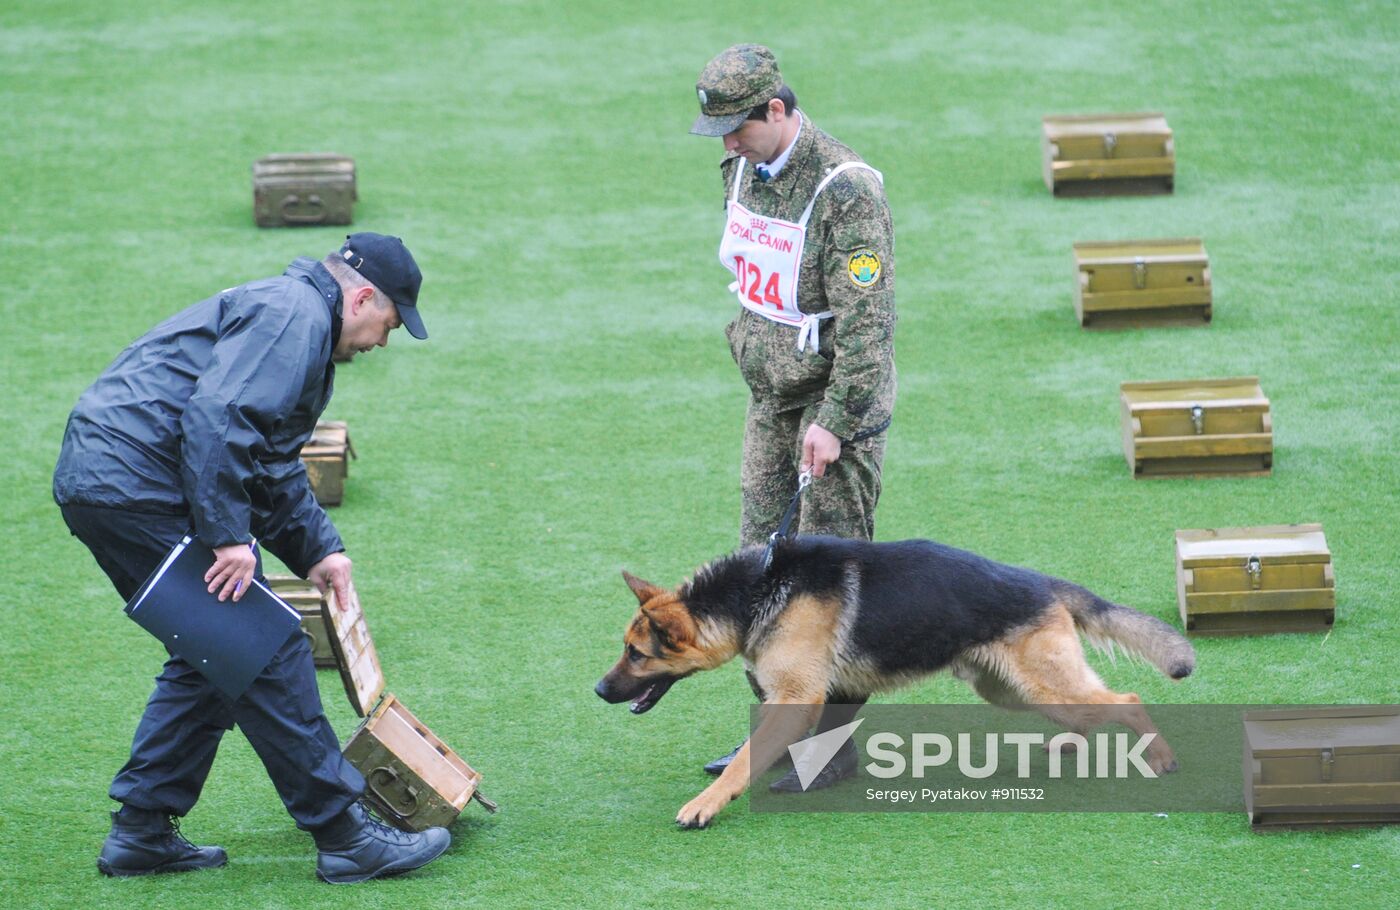 Professional Canine Championship of Russian customs authorities